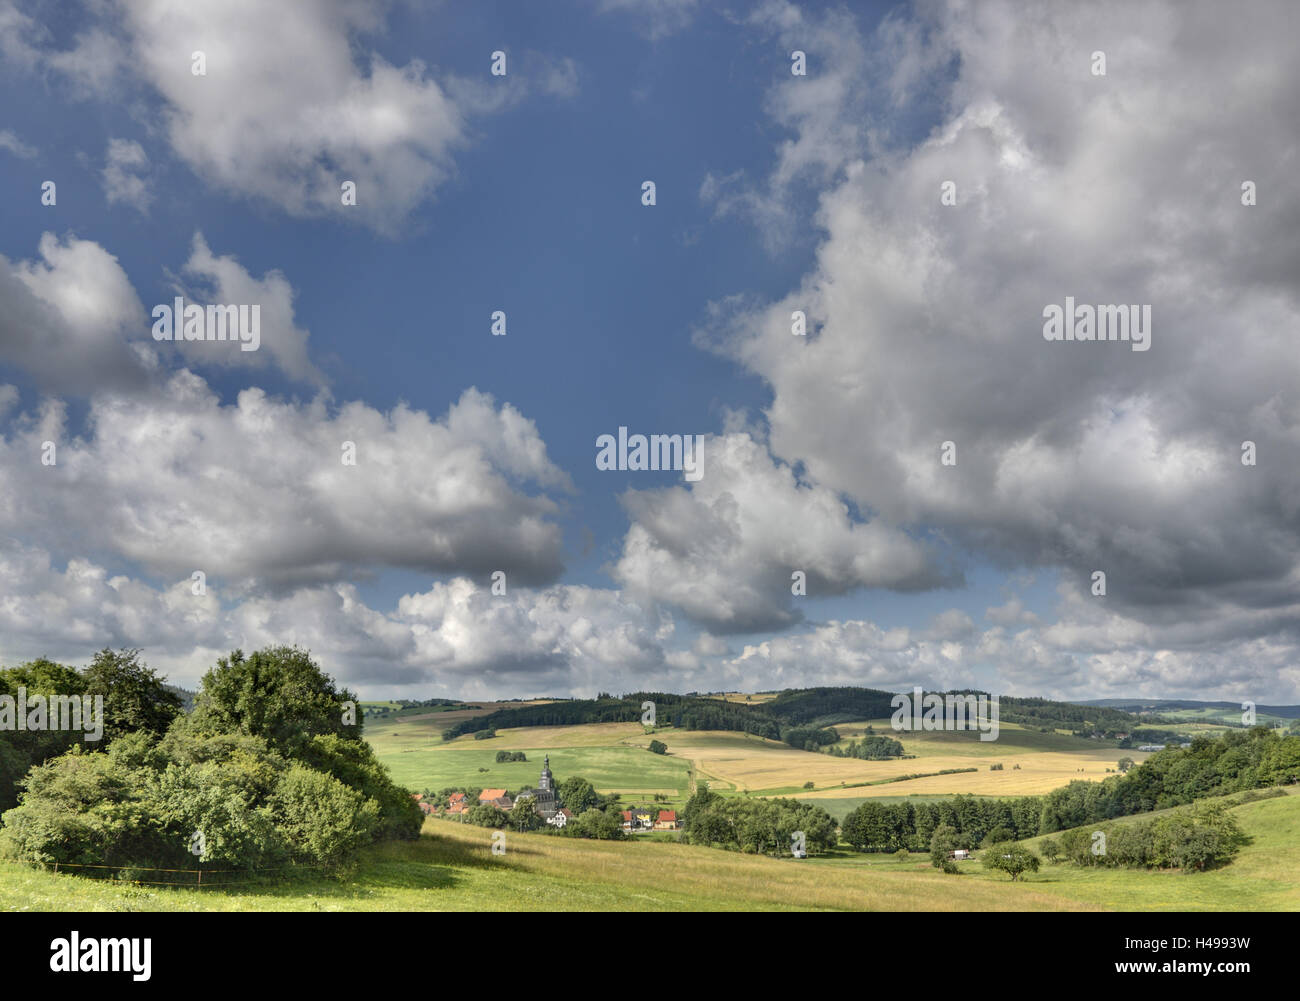 Germany, Thuringia, Thuringian wood, village Allen, scenery, village, church, fields, clouds, Stock Photo